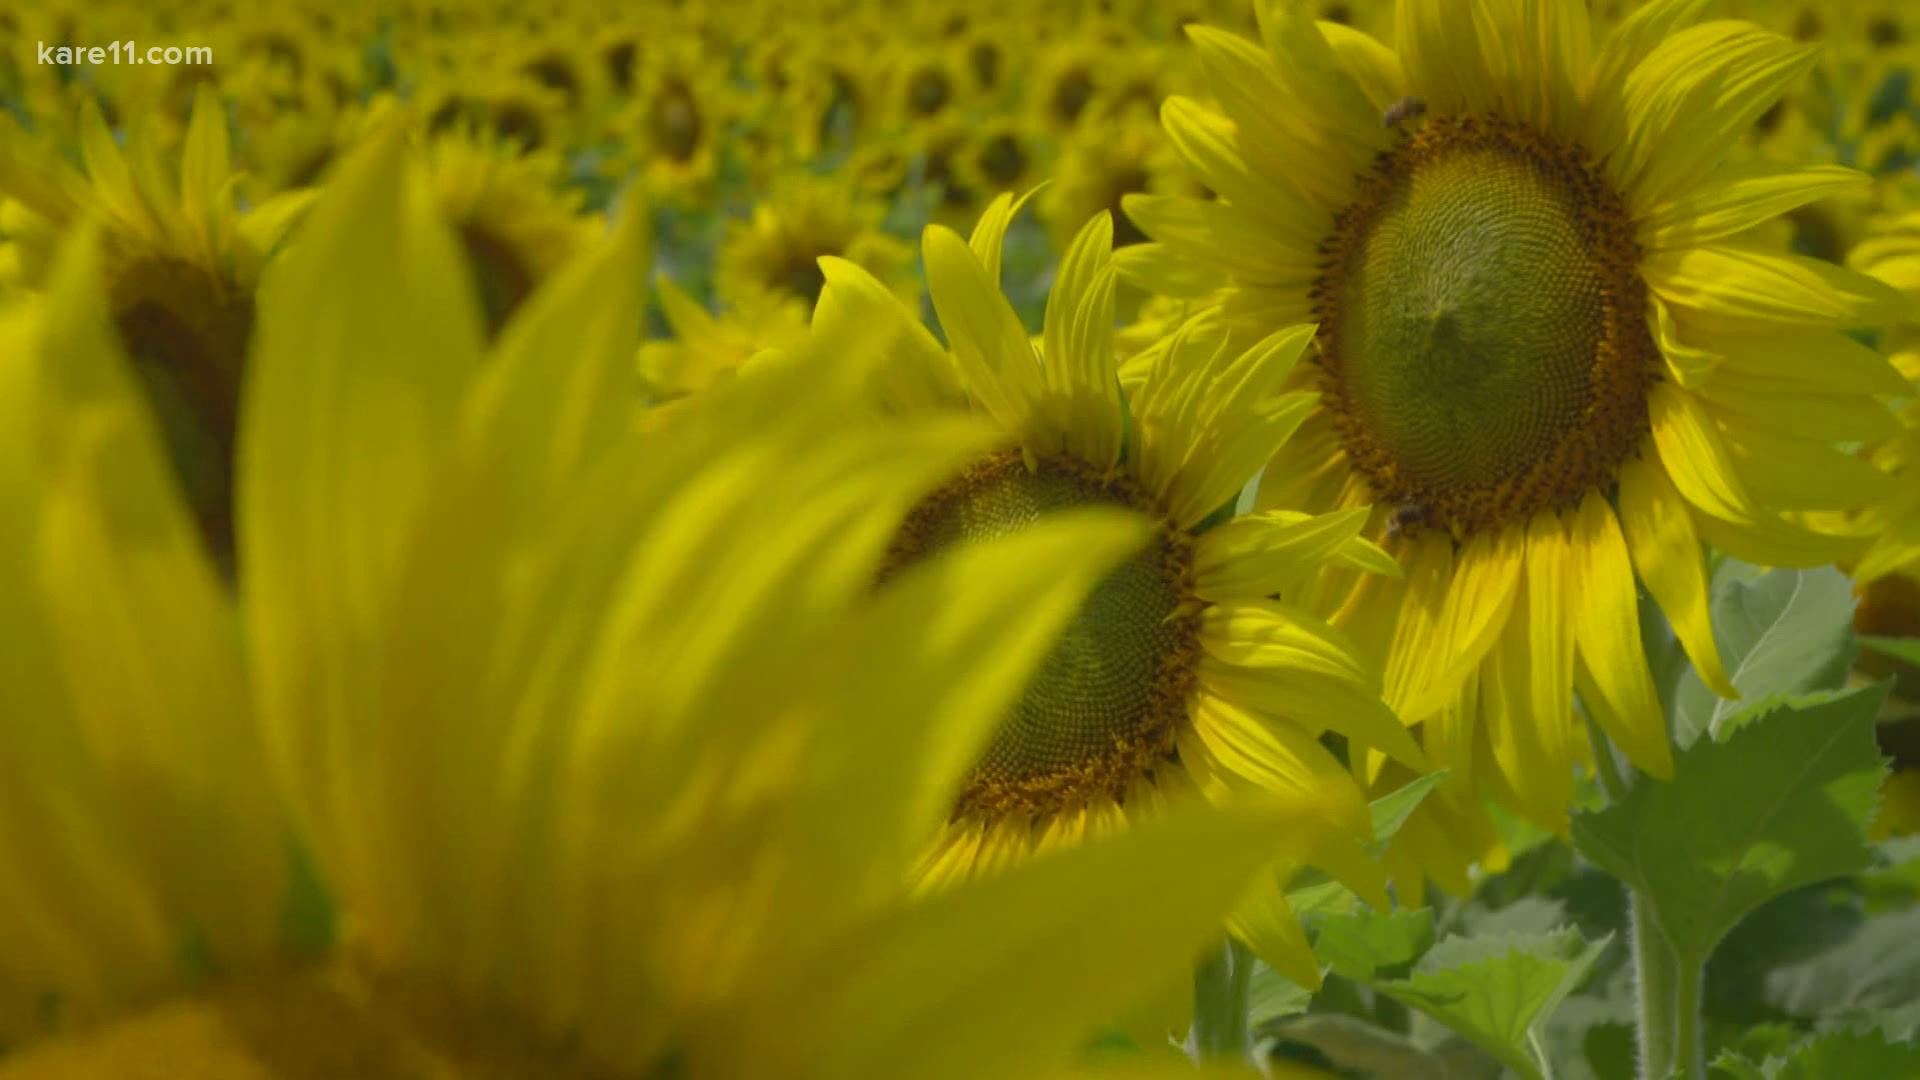 A Minnesota man thought he might spread some sunshine with sunflowers, by planting hundreds of thousands of the flowers for several people in his life